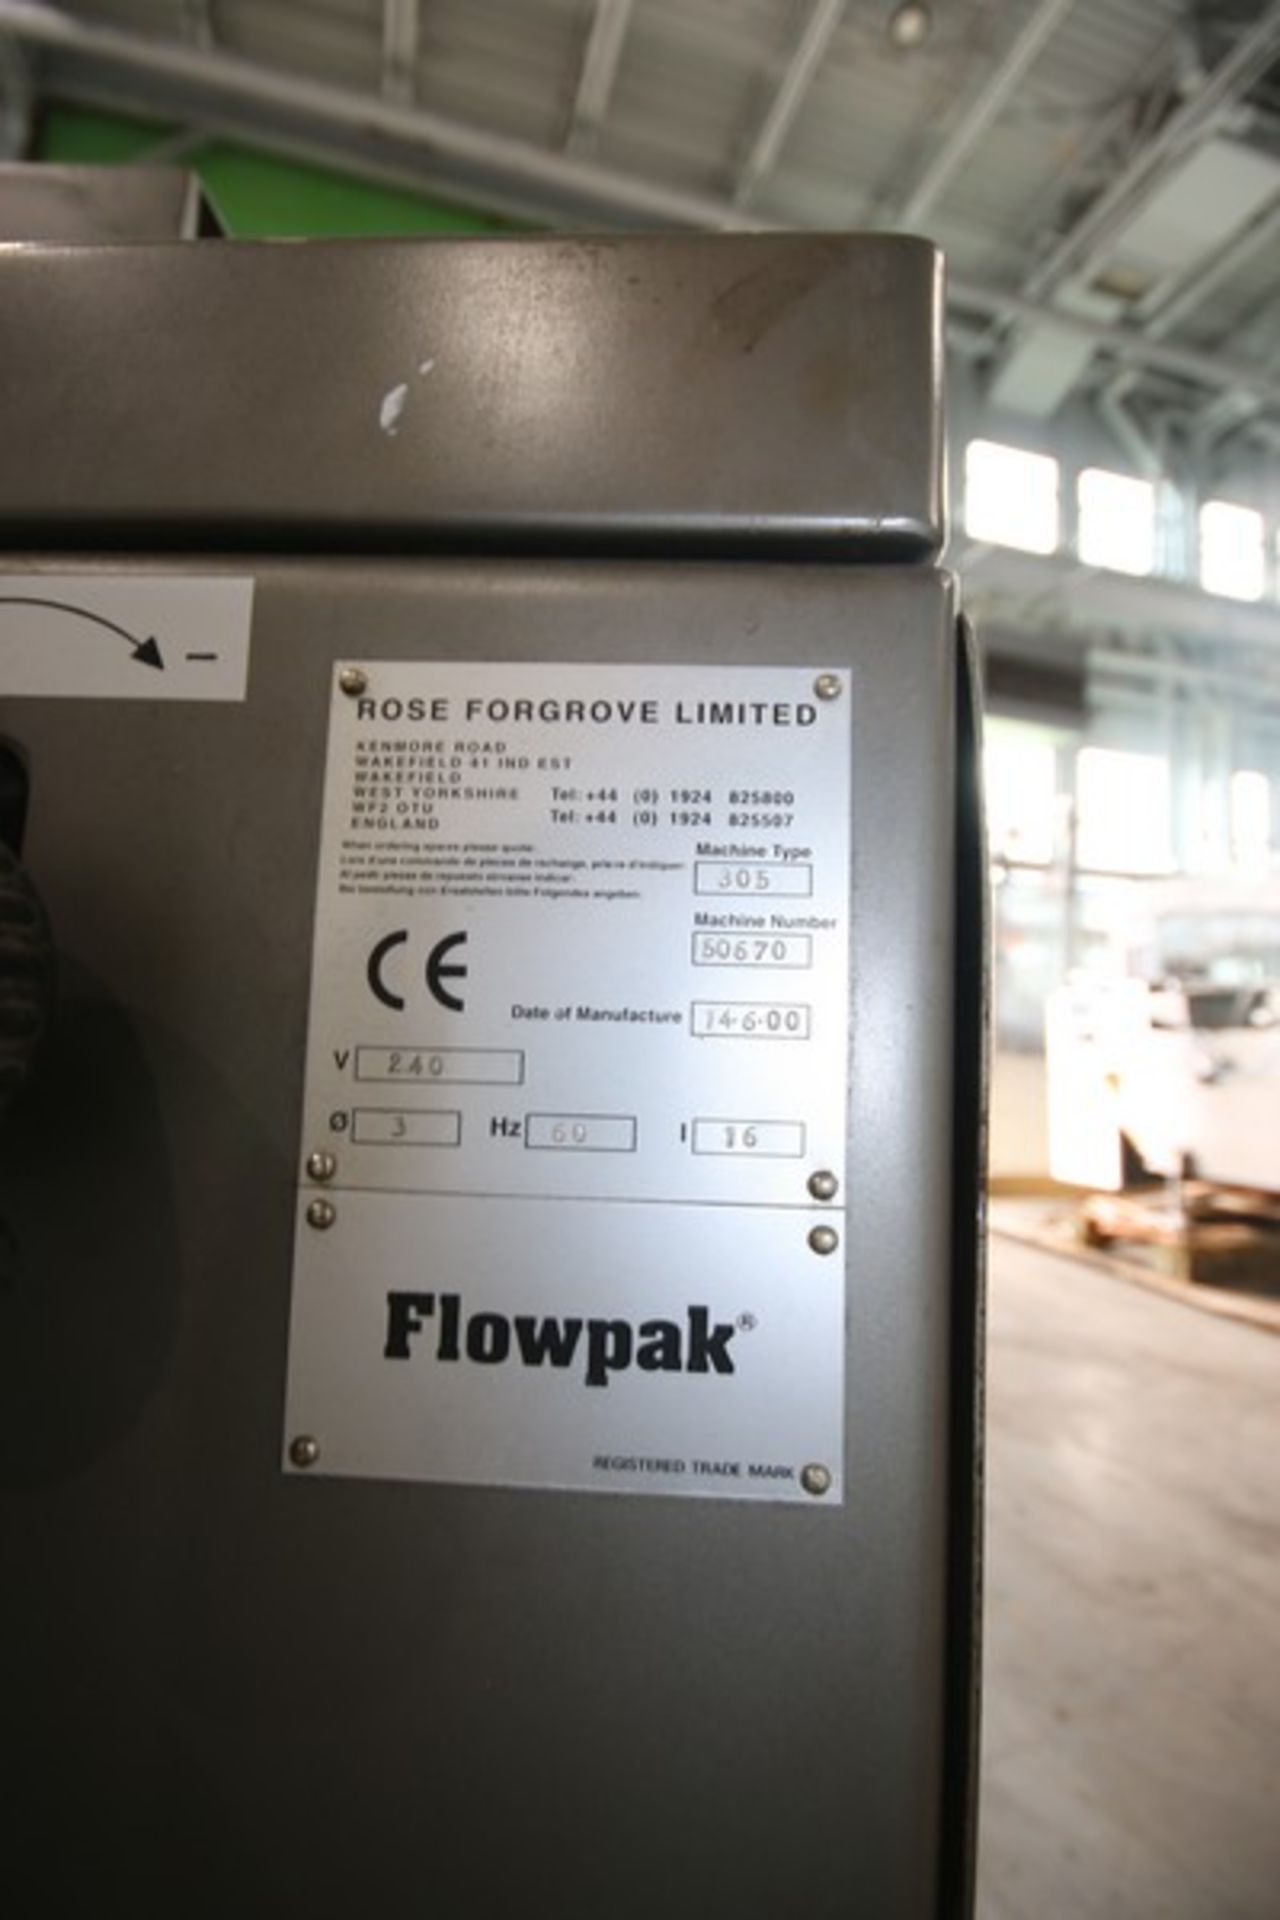 Rose Forgrove Flow-Wrapper, Machine Type:  305, Machine Number:  50670, 240 Volts, 3 Phase, with - Image 9 of 10